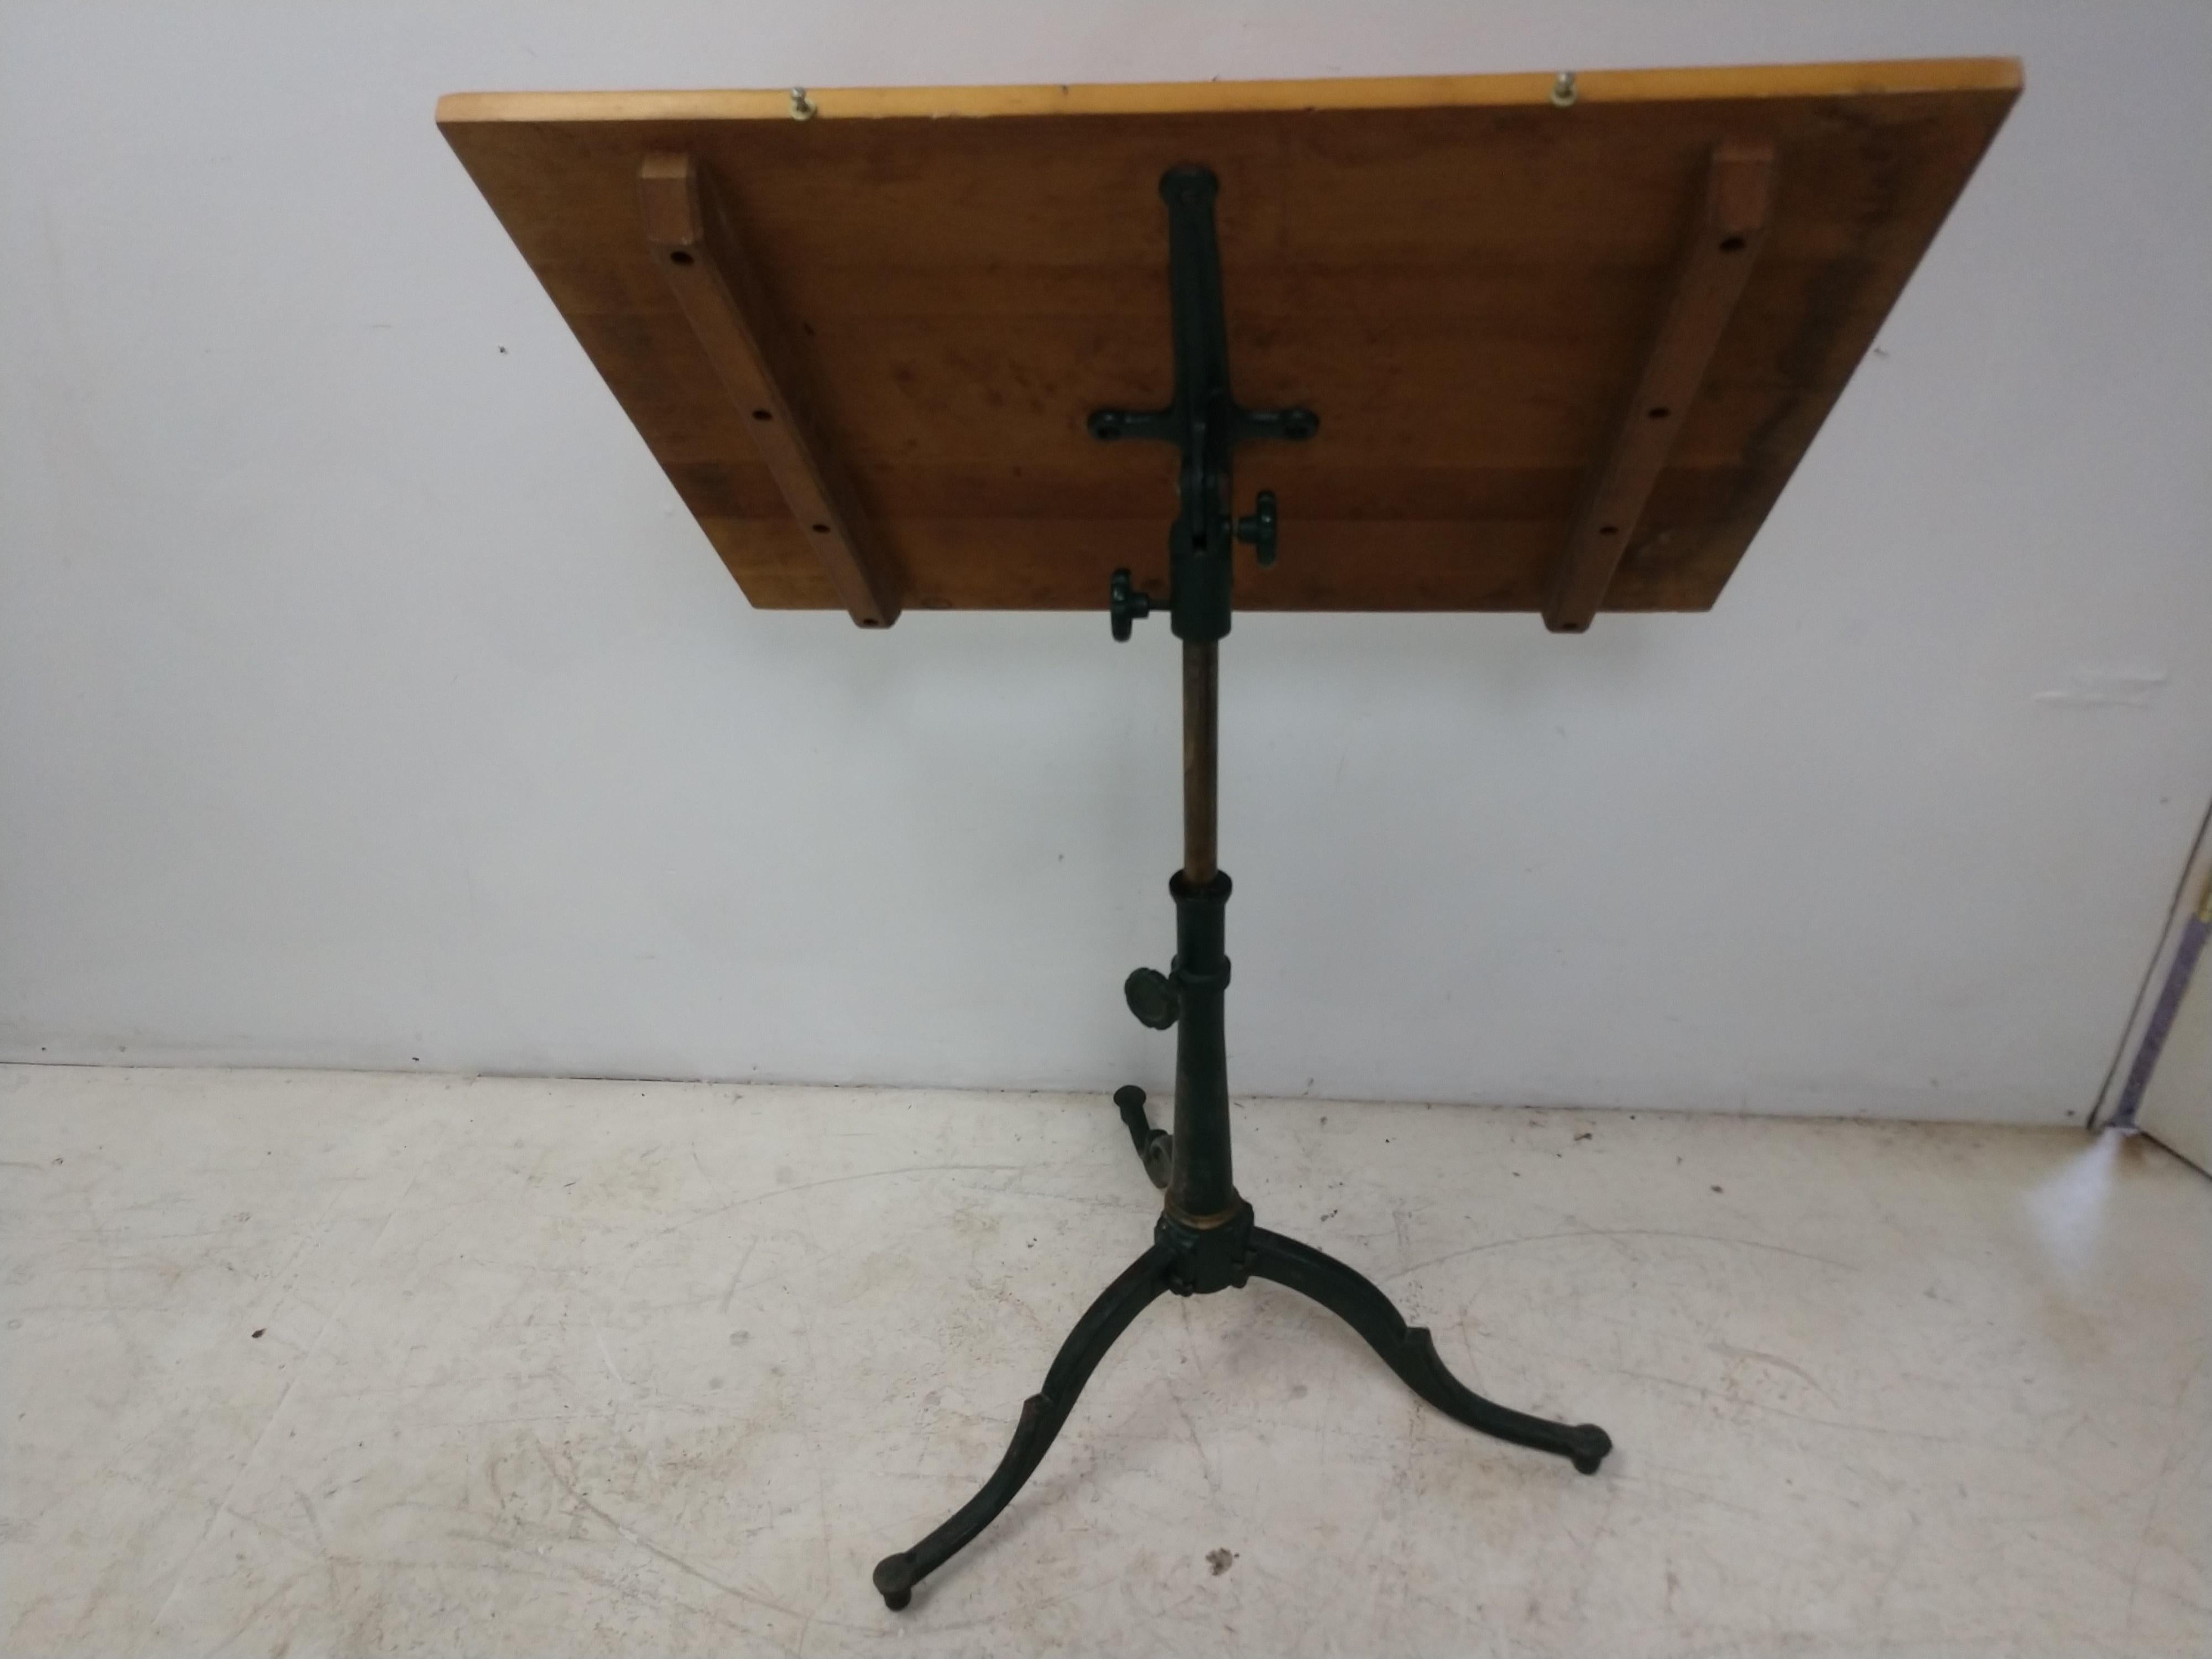 Antique cast iron drafting table by the Anderson Co. which later became the Anco drafting table supplier which is one the largest manufacturer of drafting tables. This table will totally disassemble for easy parcel post shipping. Cast iron legs and